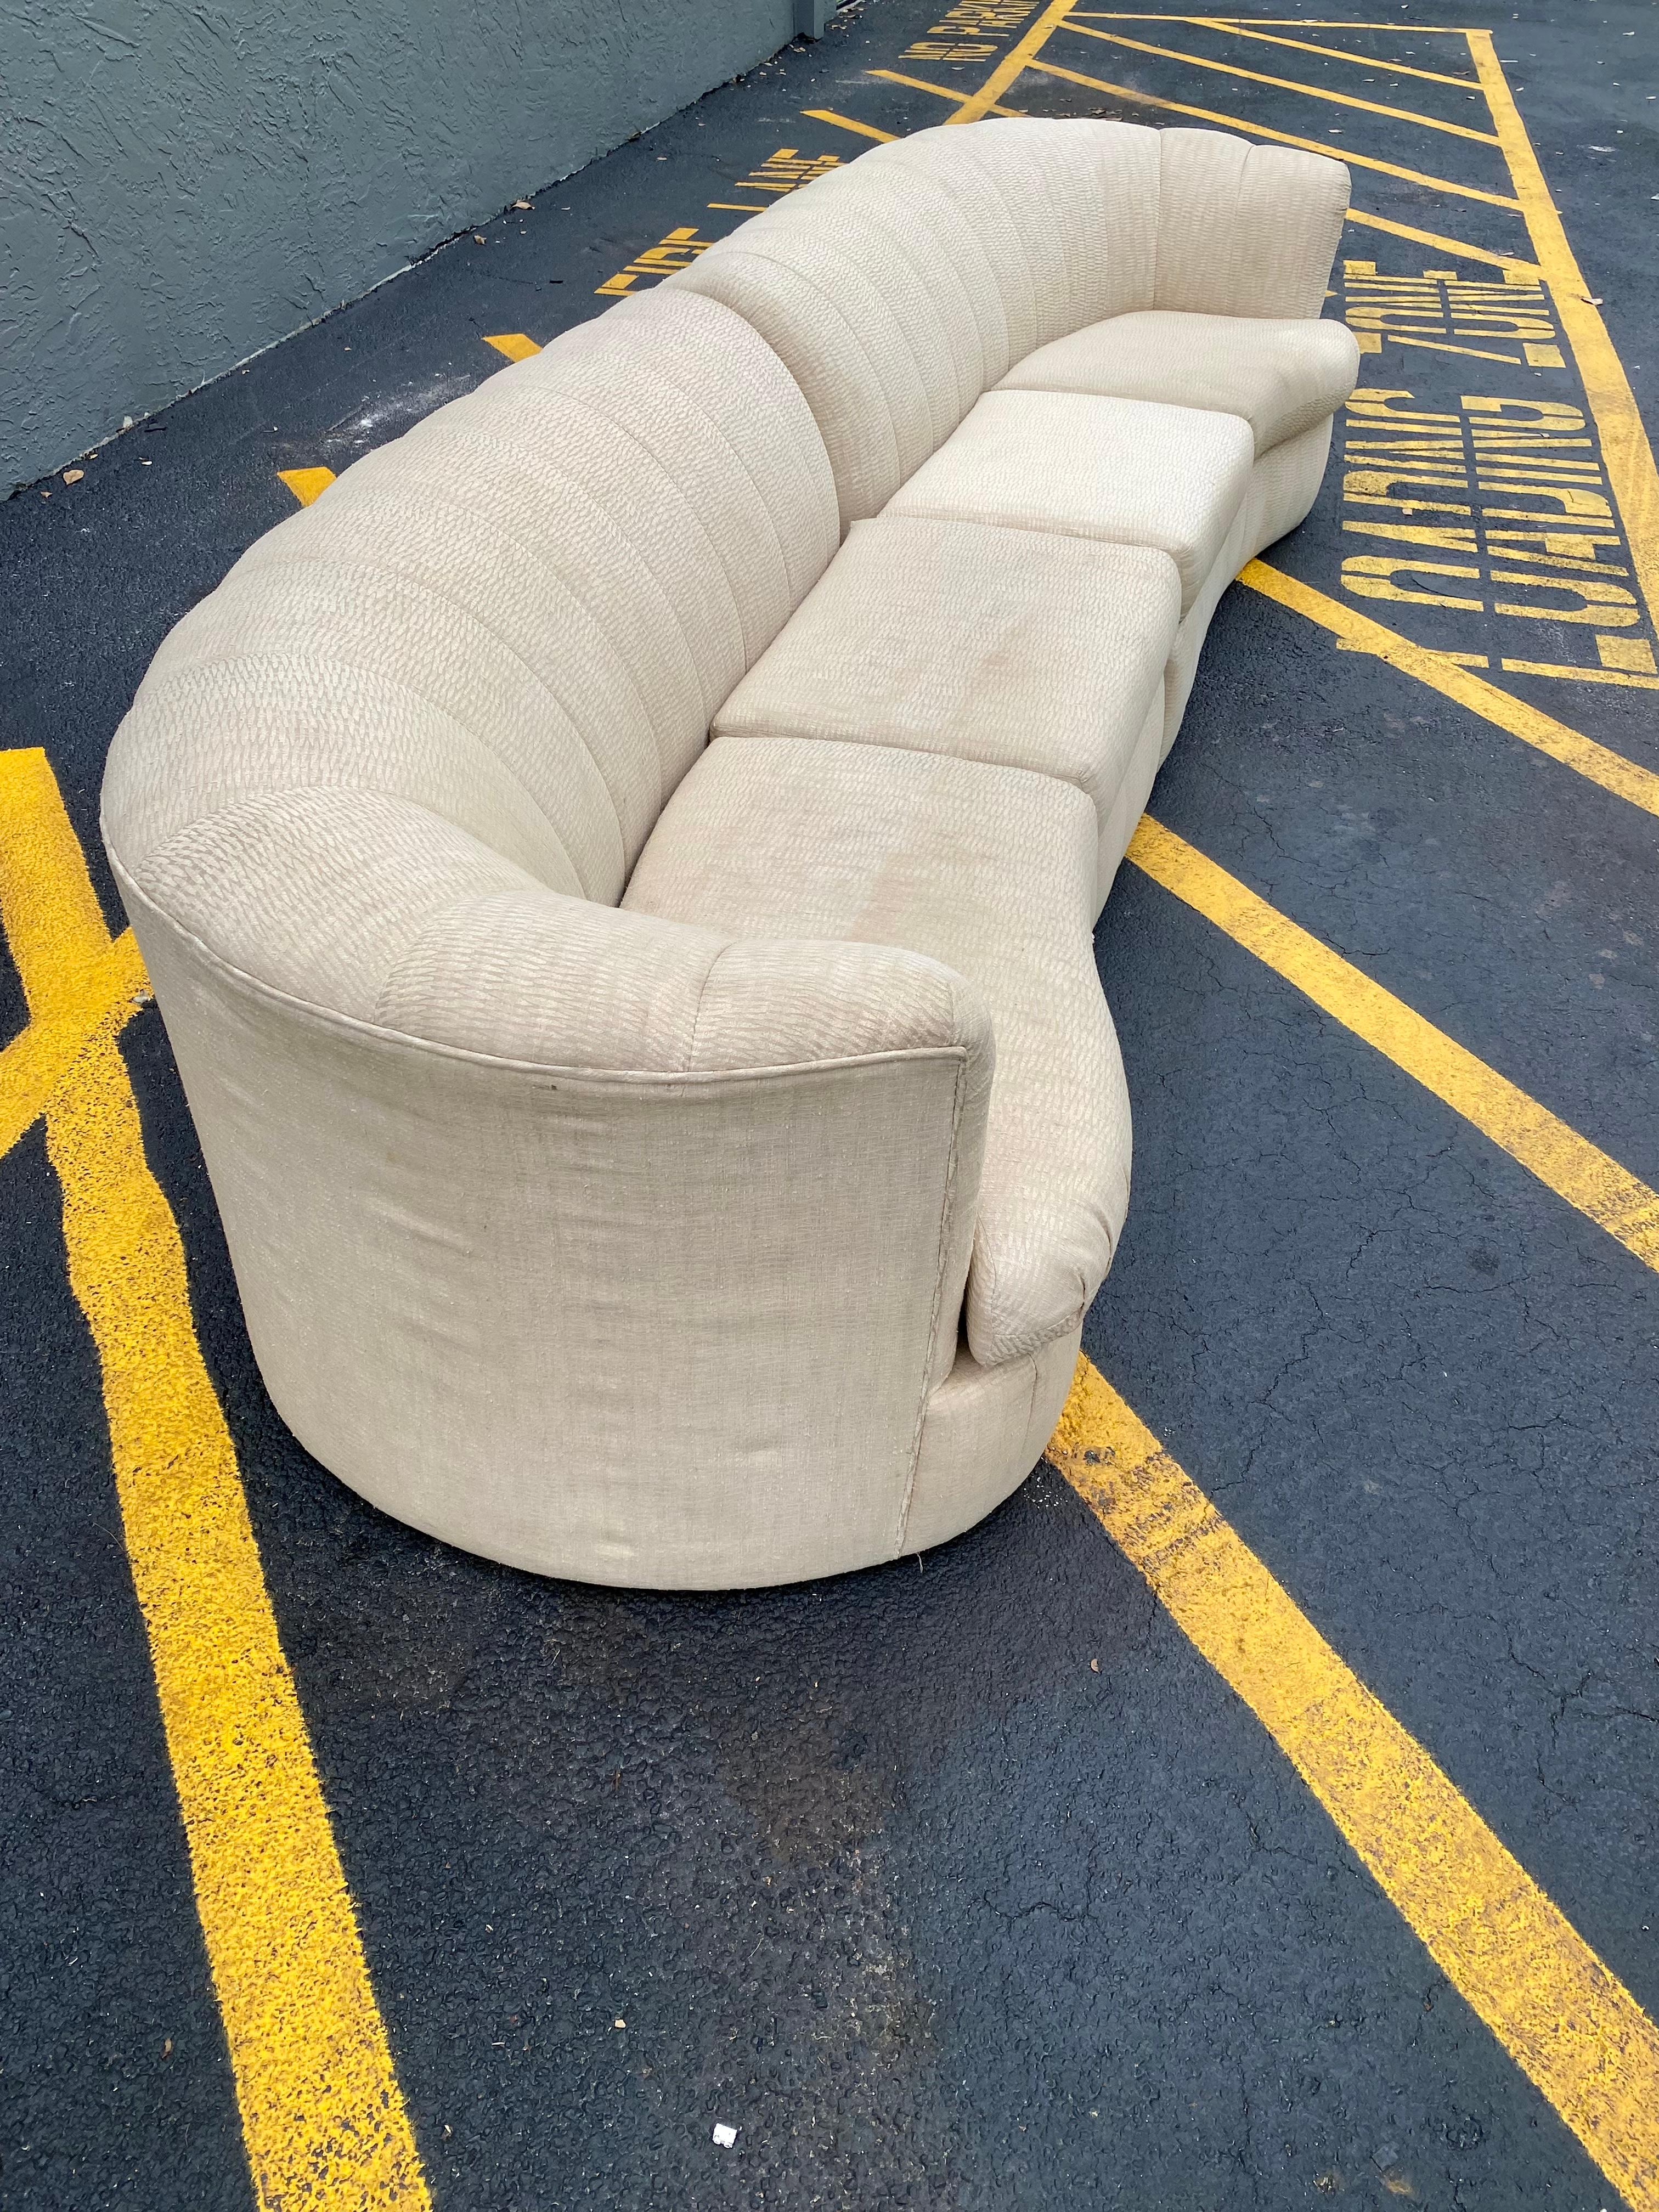 On offer on this occasion is one of the most stunning, sectional you could hope to find. Outstanding design is exhibited throughout. The beautiful sectional is statement piece which is also extremely comfortable and packed with personality!! Just